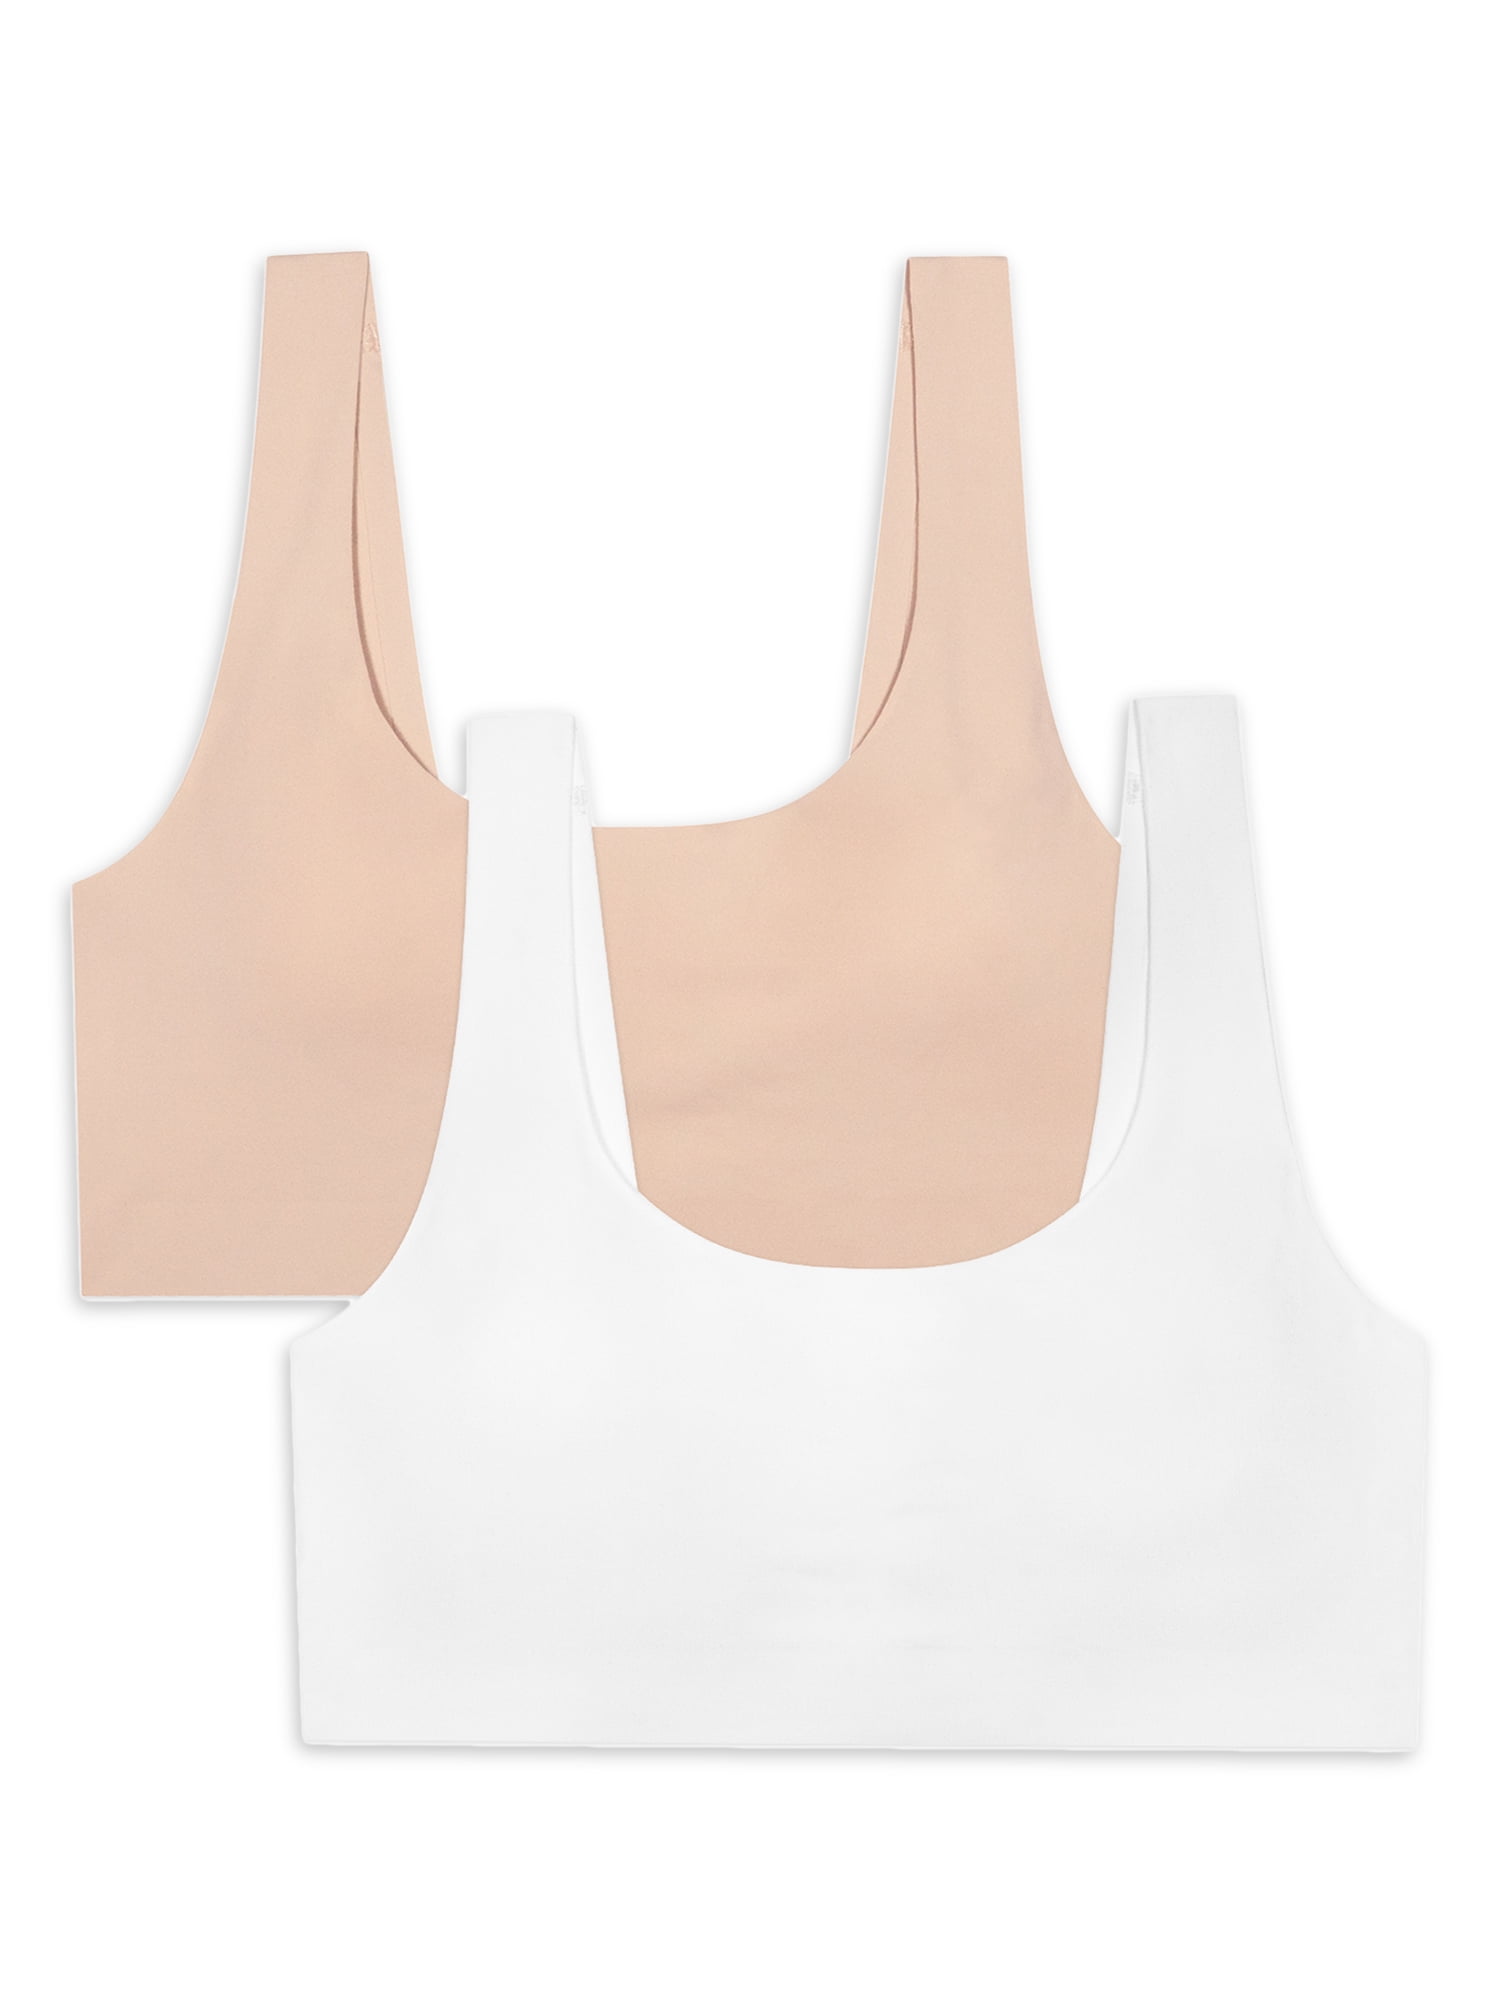 Fruit of the Loom Girls Bras, 2 Pack Invisible Scoop Neck Bralette